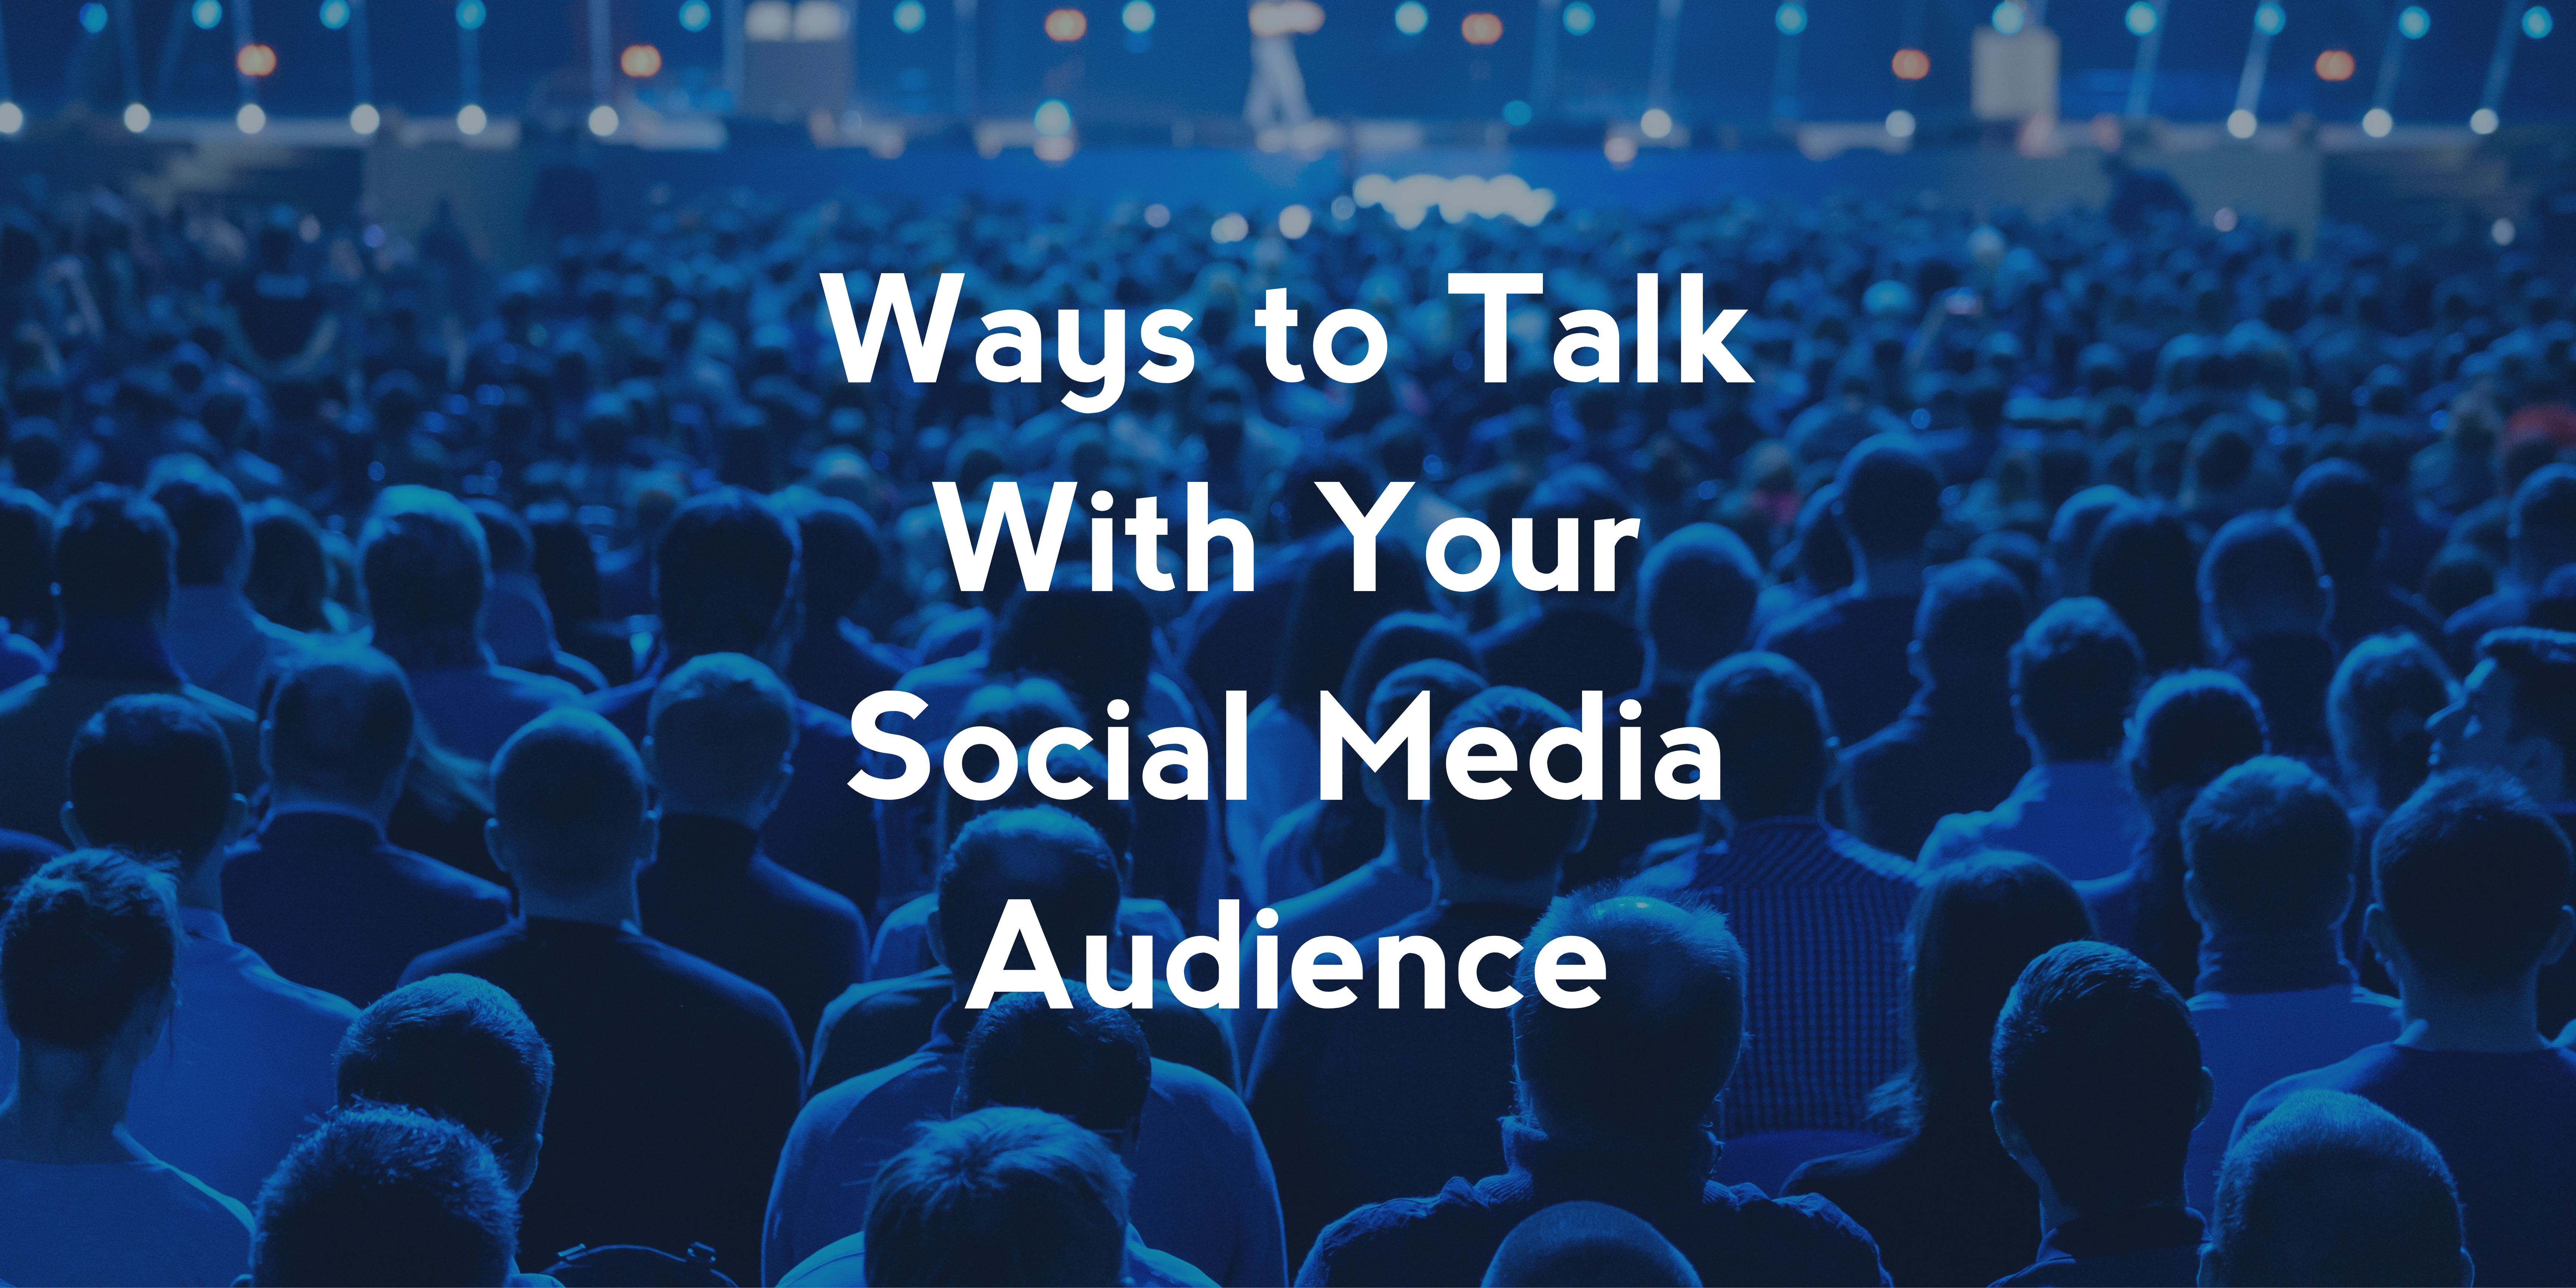 Ways to Talk With Your Social Media Audience